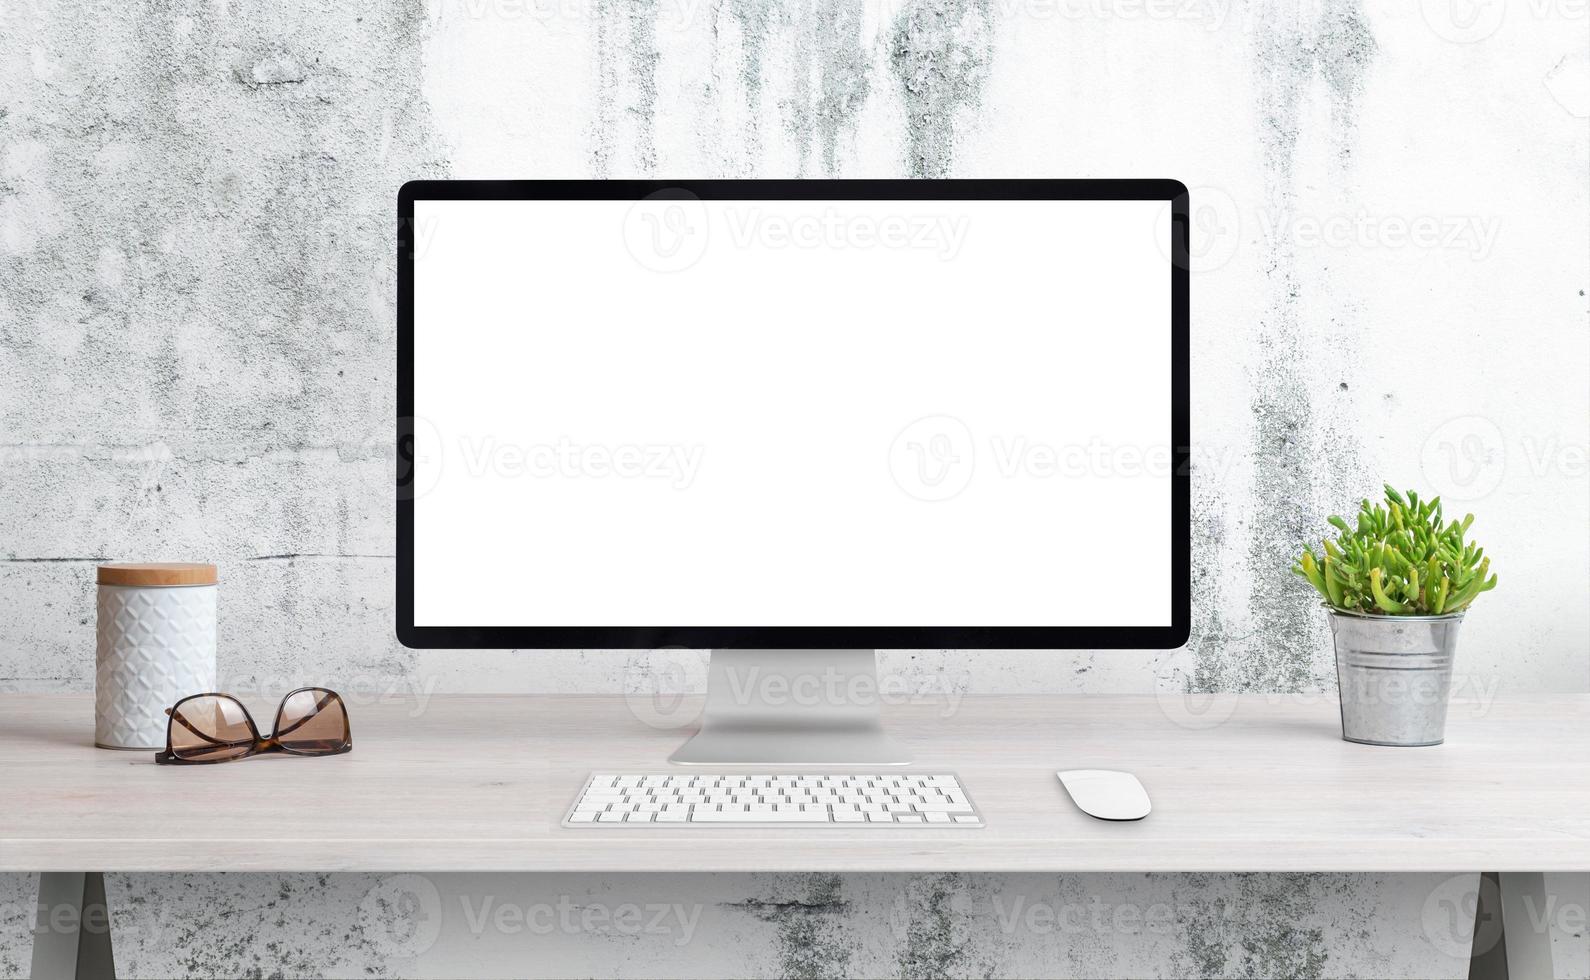 Computer display on office desk with isolated screen for mockup, wep page presentation. Clean desk with plant, glasses and box. White rough wall in the background photo